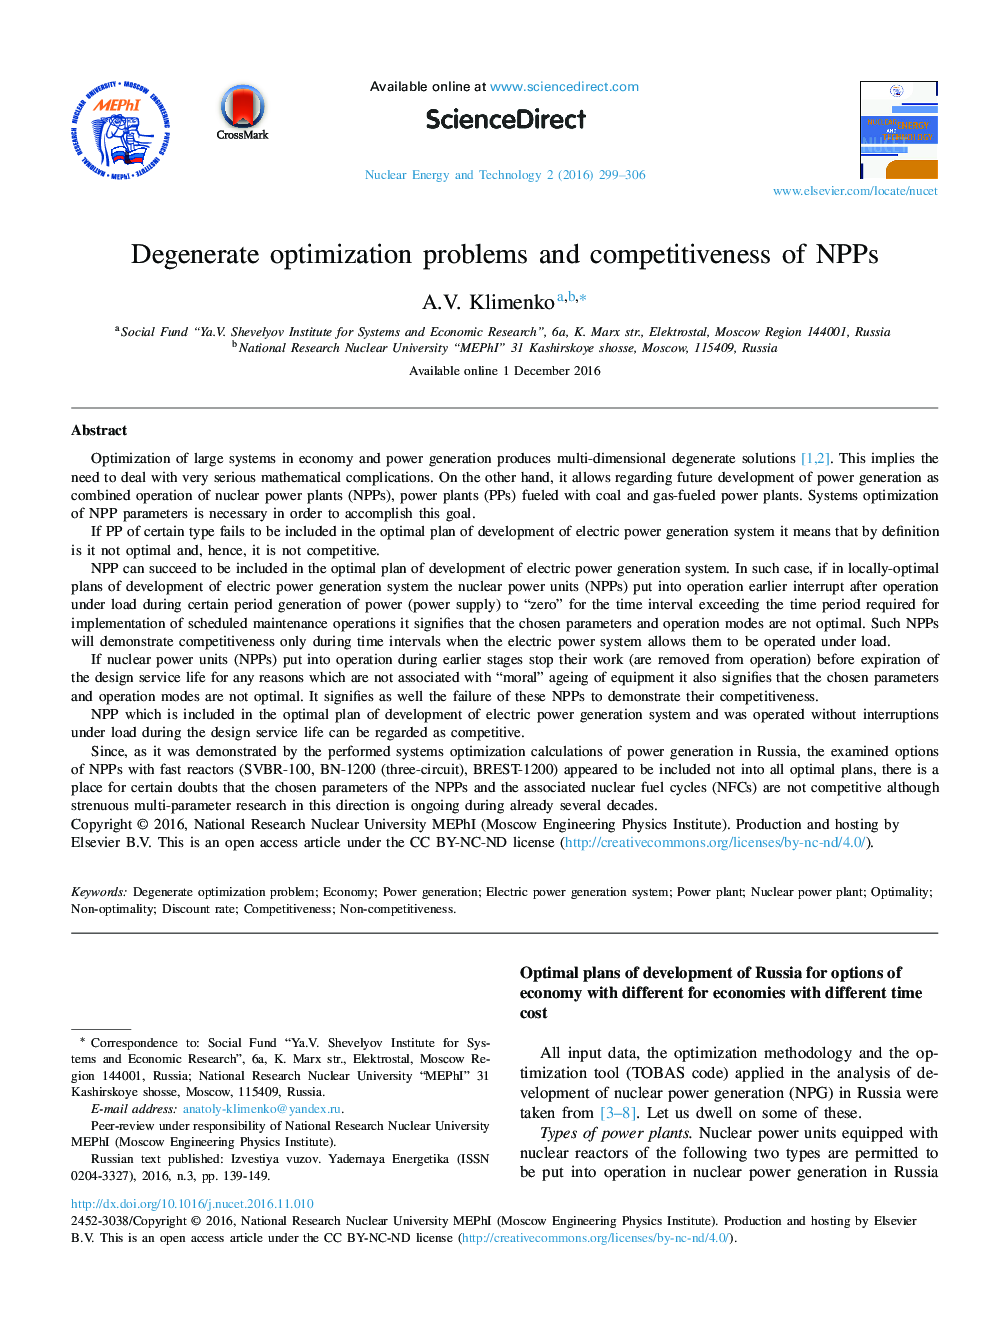 Degenerate optimization problems and competitiveness of NPPs